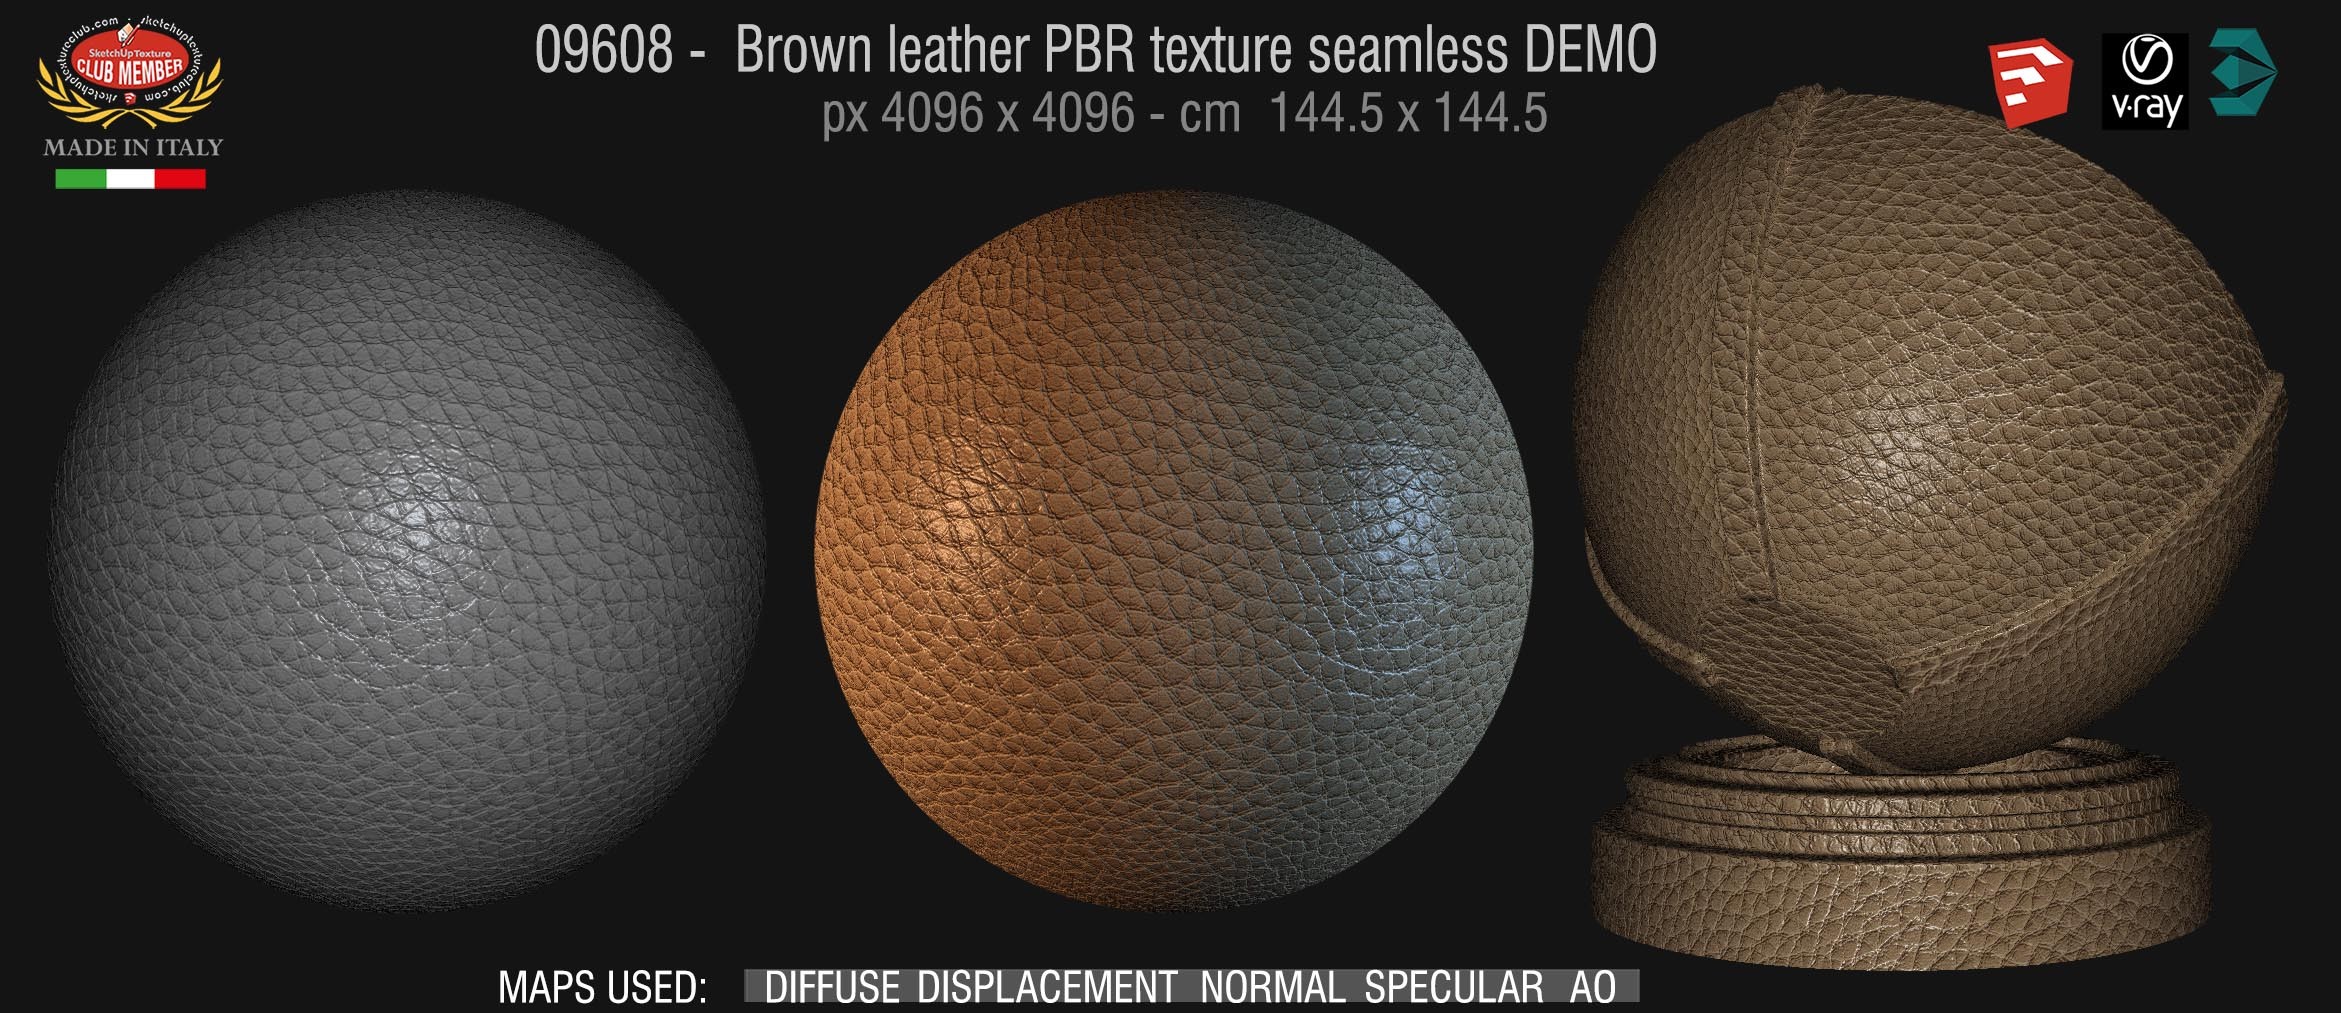 09608 Brown leather PBR texture seamless DEMO